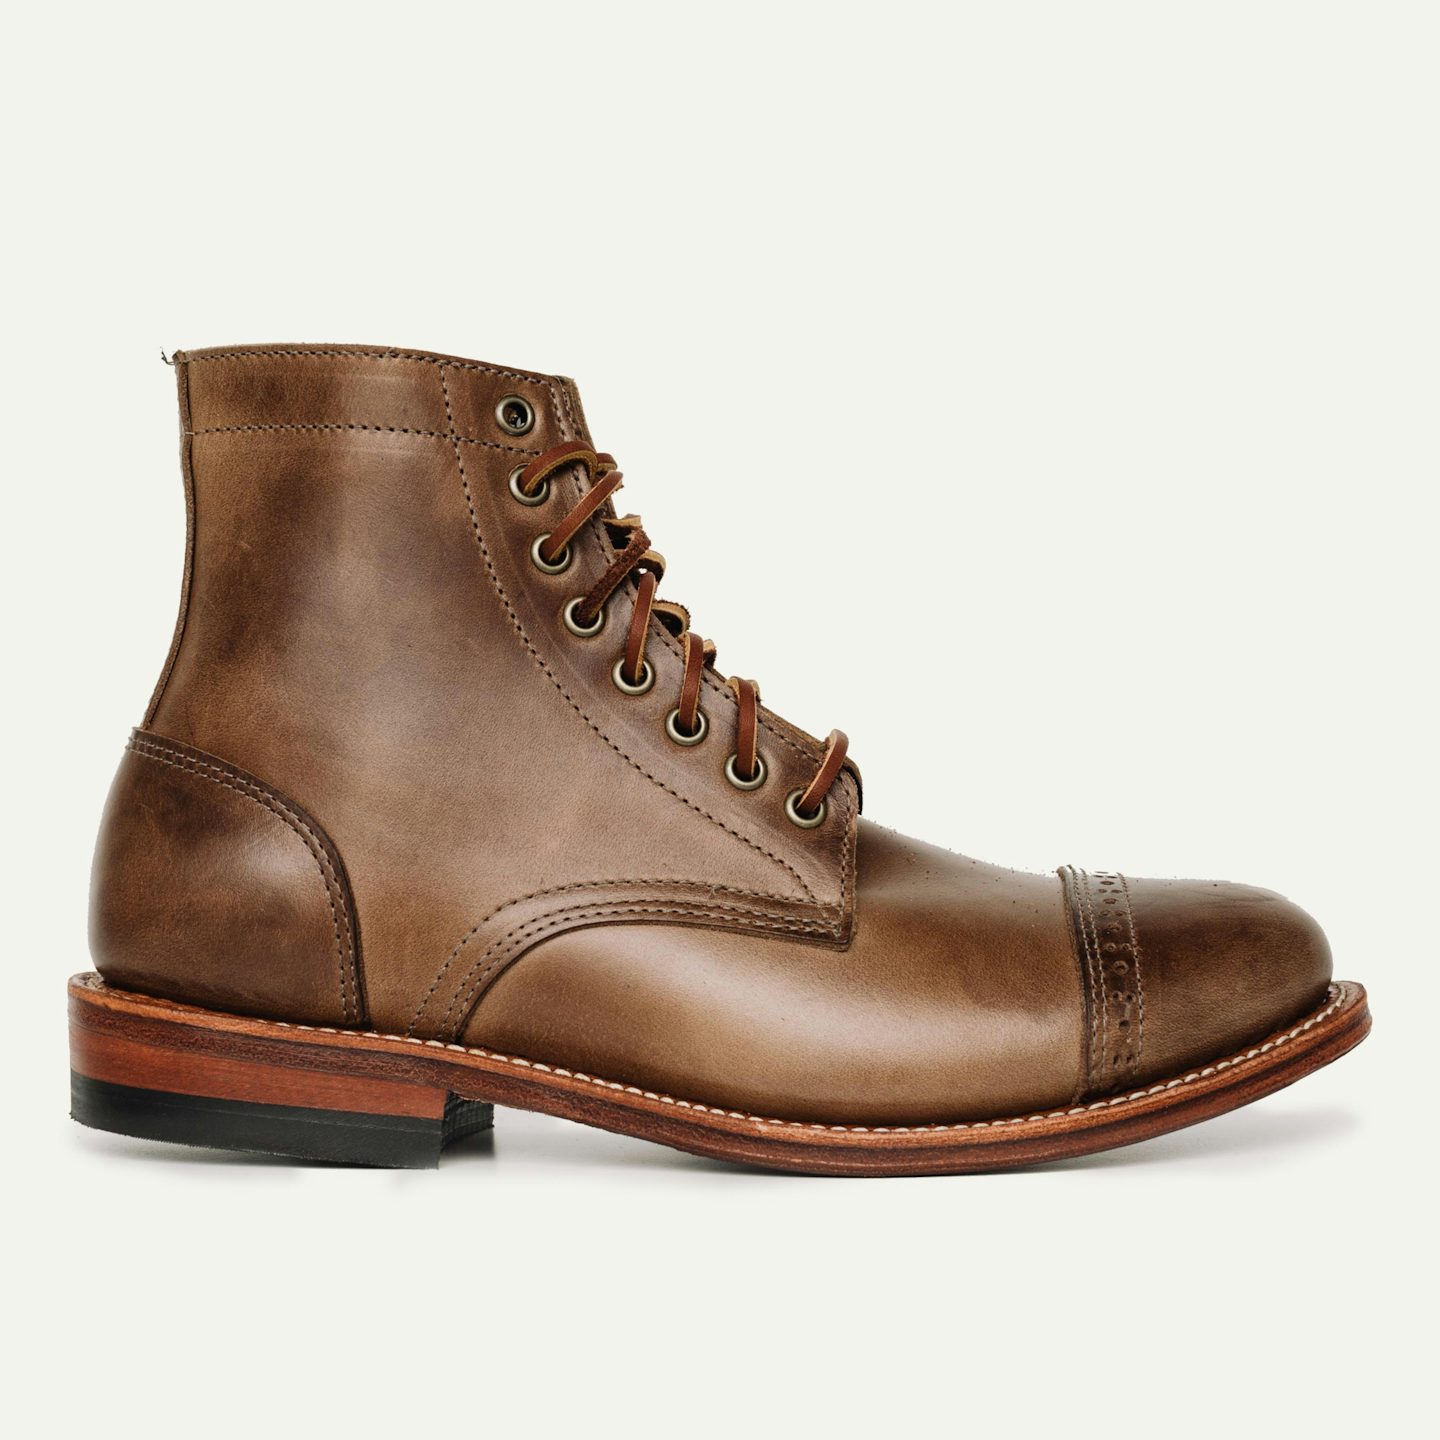 restjes Willen radioactiviteit Cap-Toe Trench Boot - Natural Chromexcel, Leather Sole with Vibram Toplift  - Made in USA | Oak Street Bootmakers